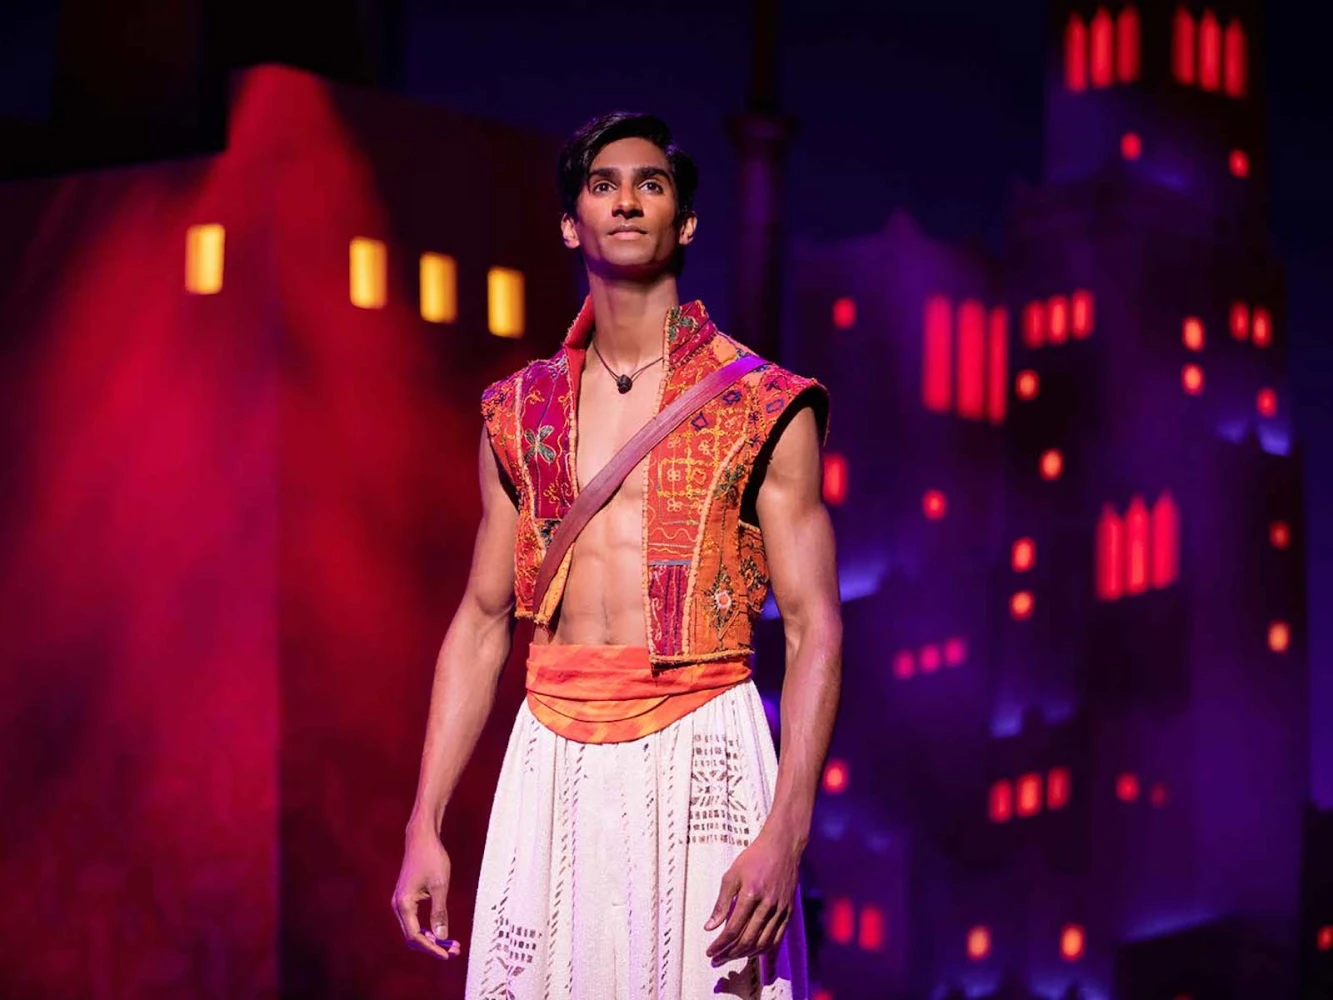 Aladdin on Broadway: What to expect - 5